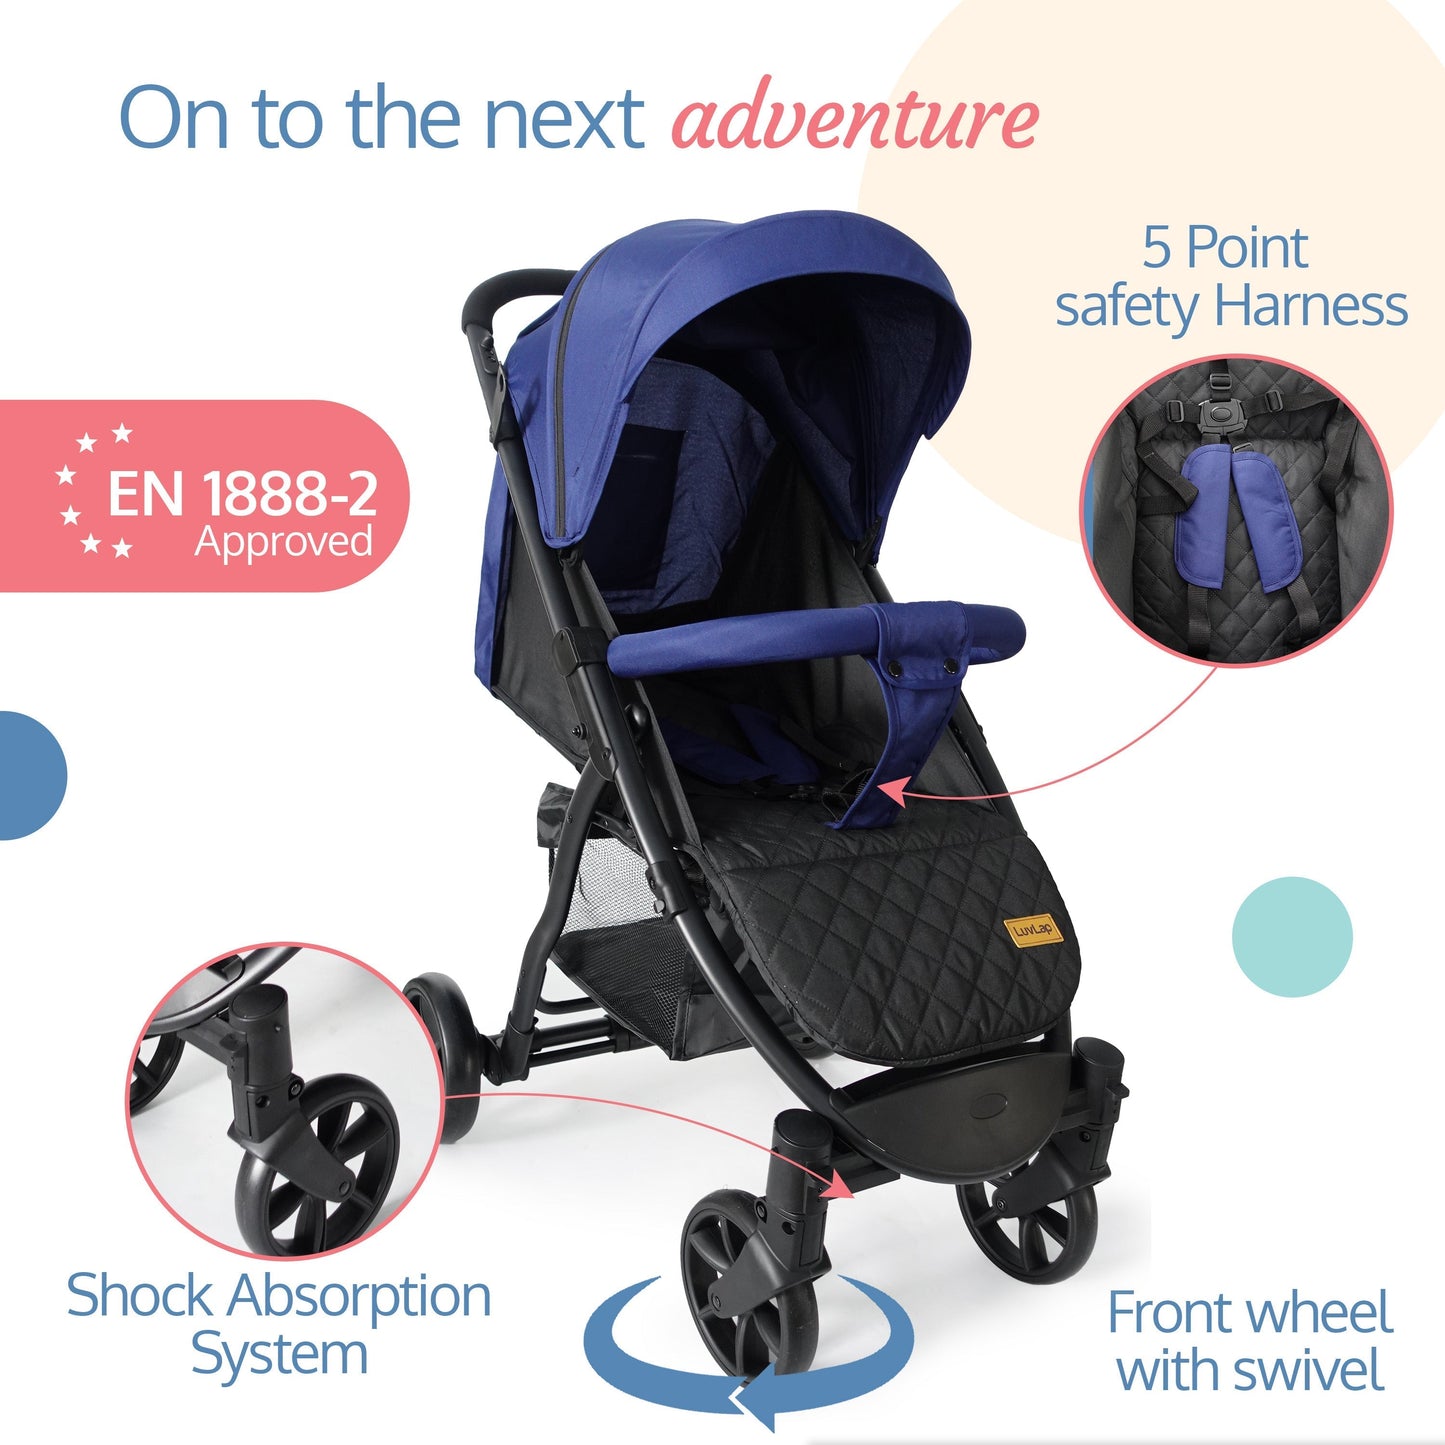 Primo Baby Stroller/Pram with 5 Point Safety Harness, EN1888-2 Certified, Looking Window, Multi Level Recline & Adjustable footrest, Extendable Canopy, Blue